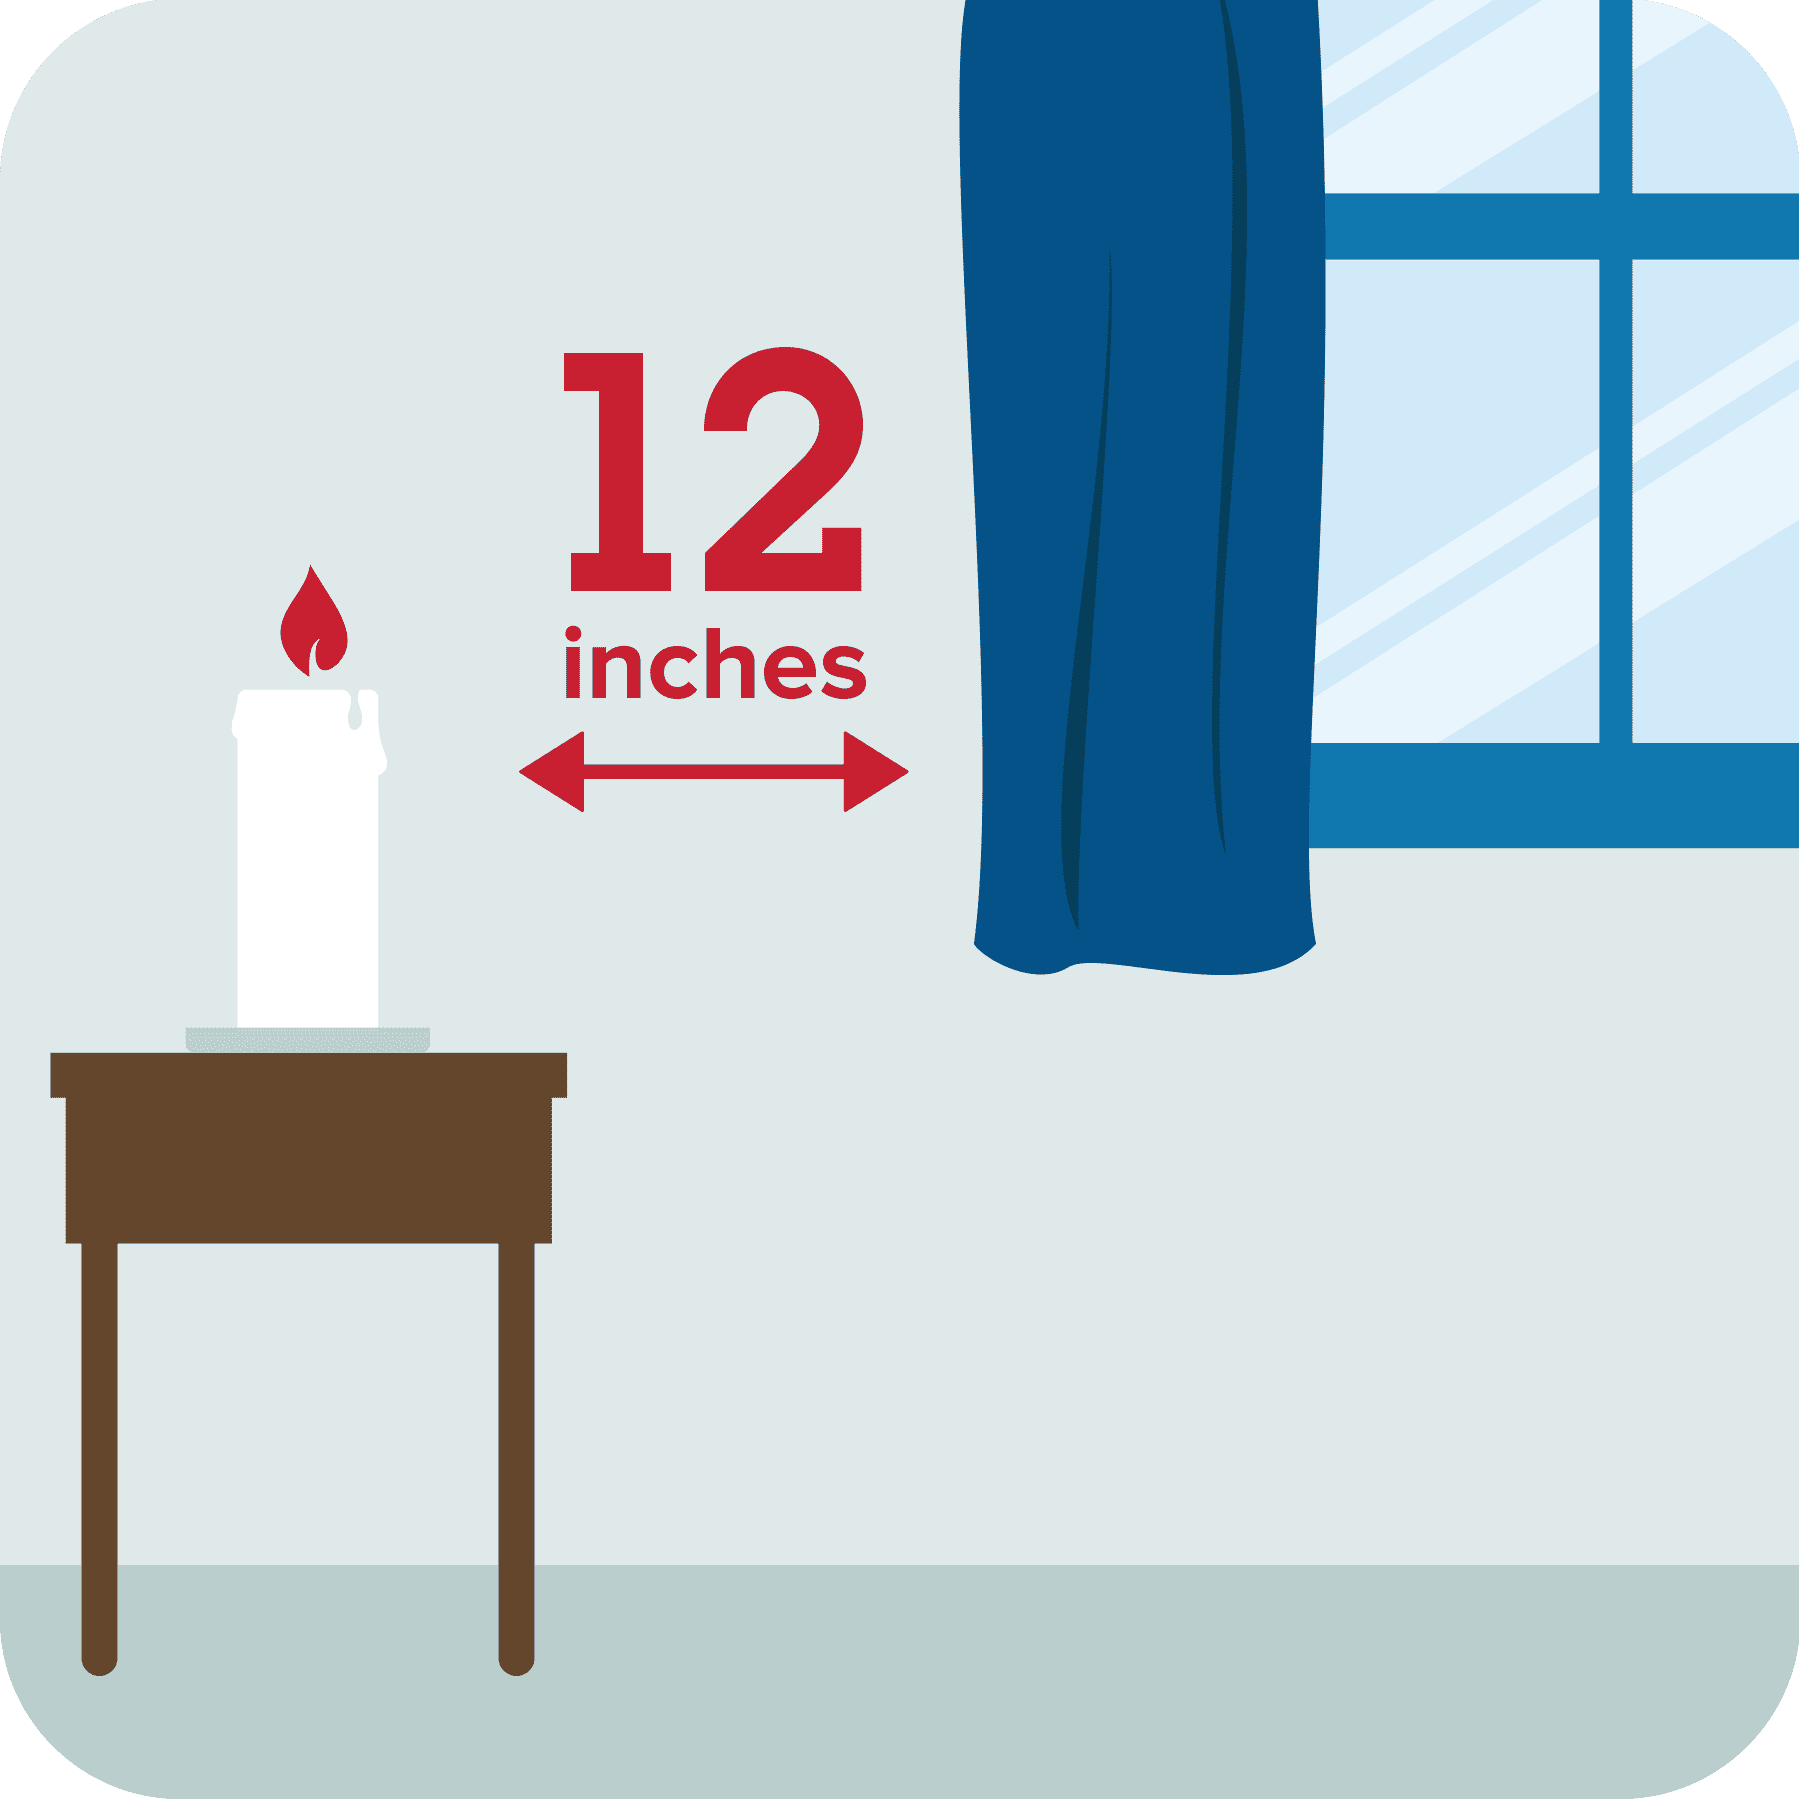 Keep lit candles at least 12 inches from anything that can burn